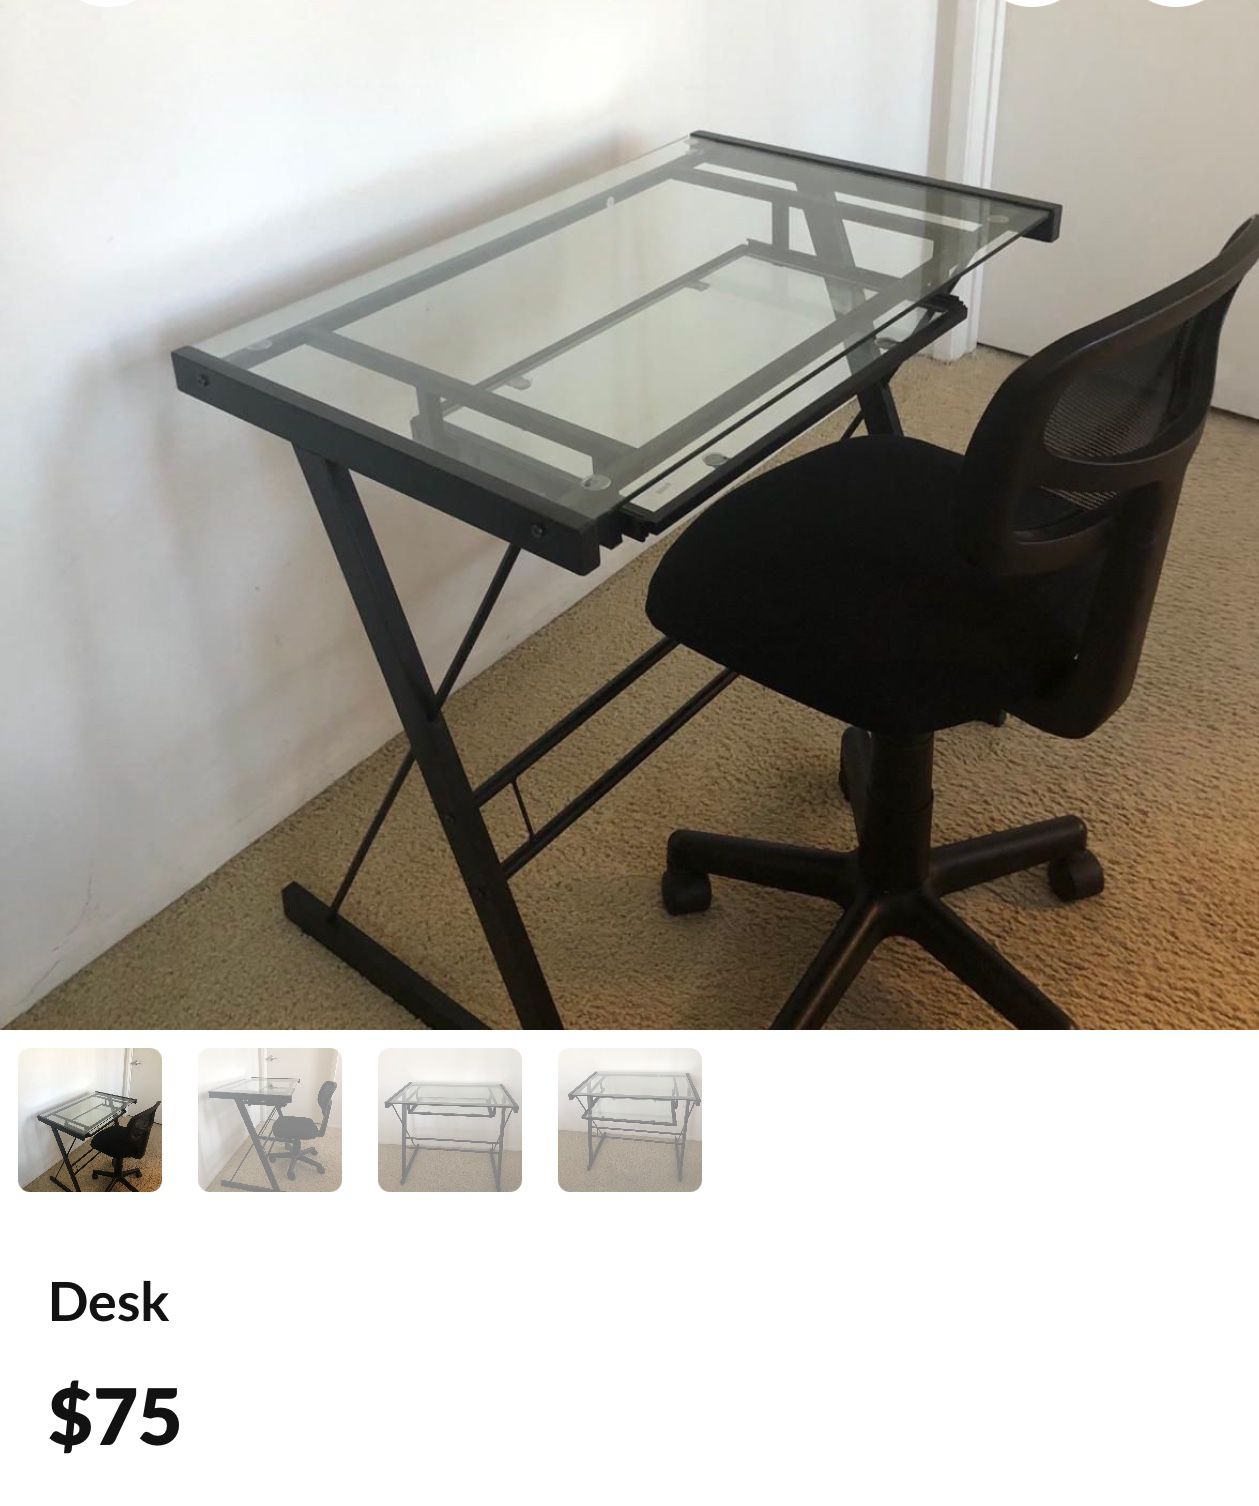 Glass table and chair